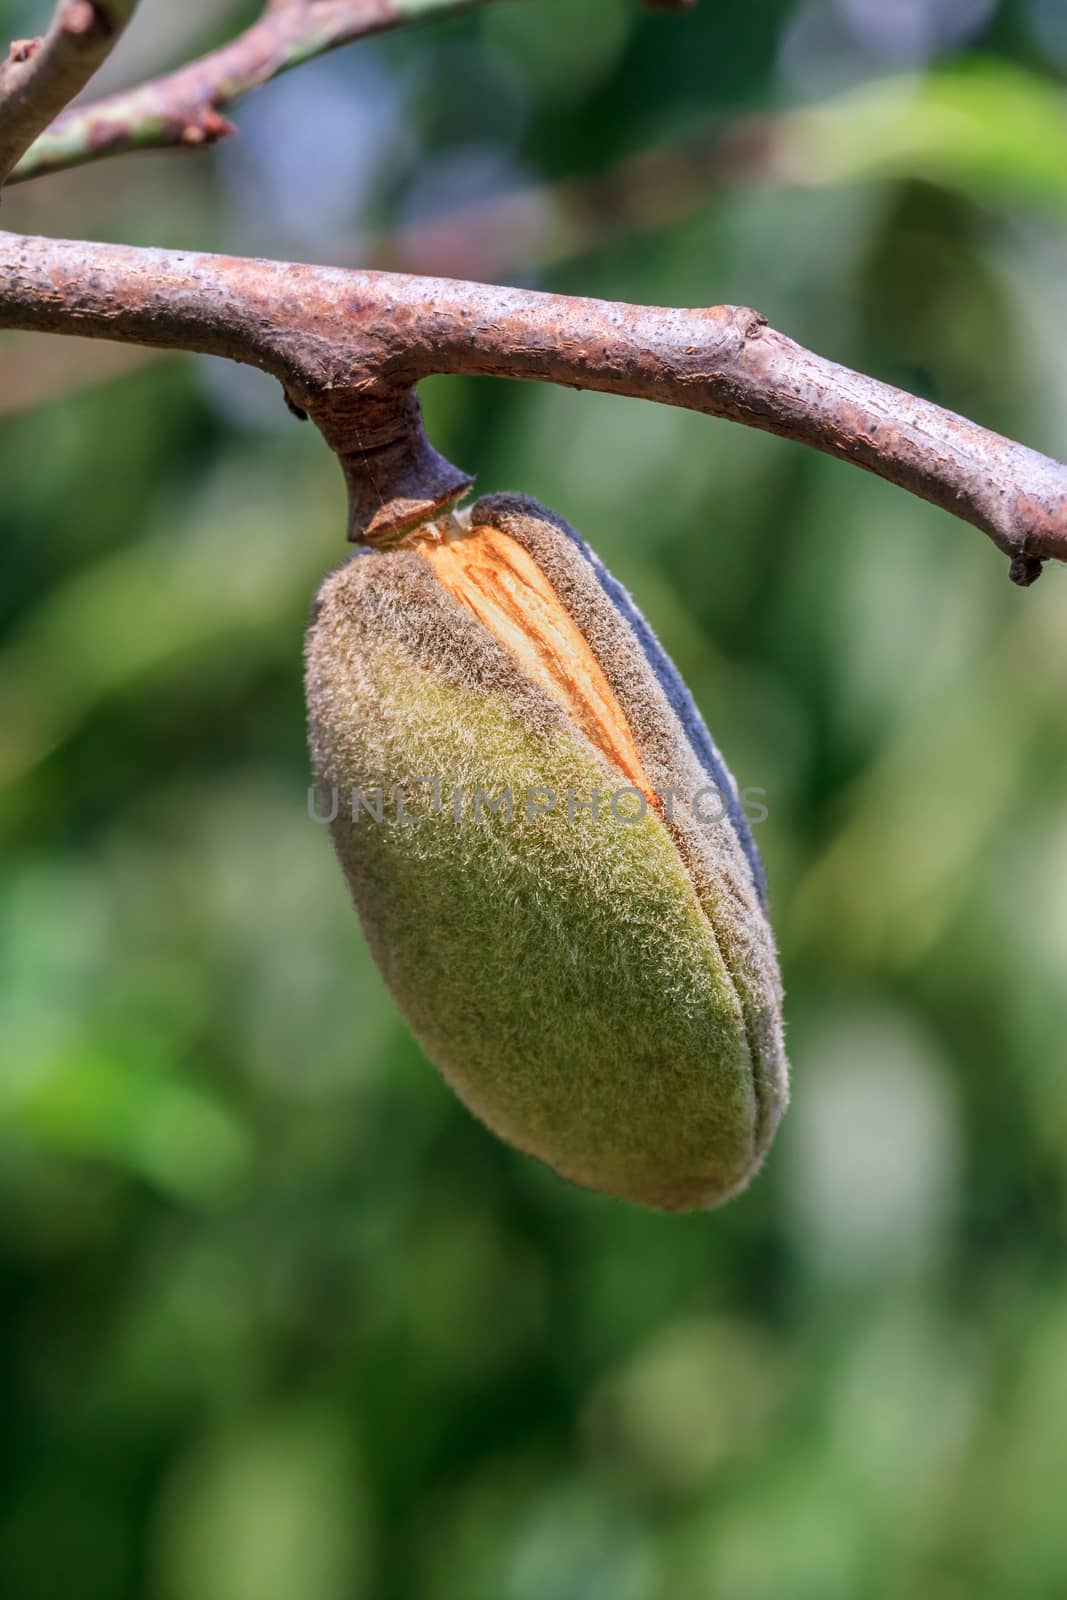 Ripe almonds walnut hanging on a branch. Close-up, focus on the nut